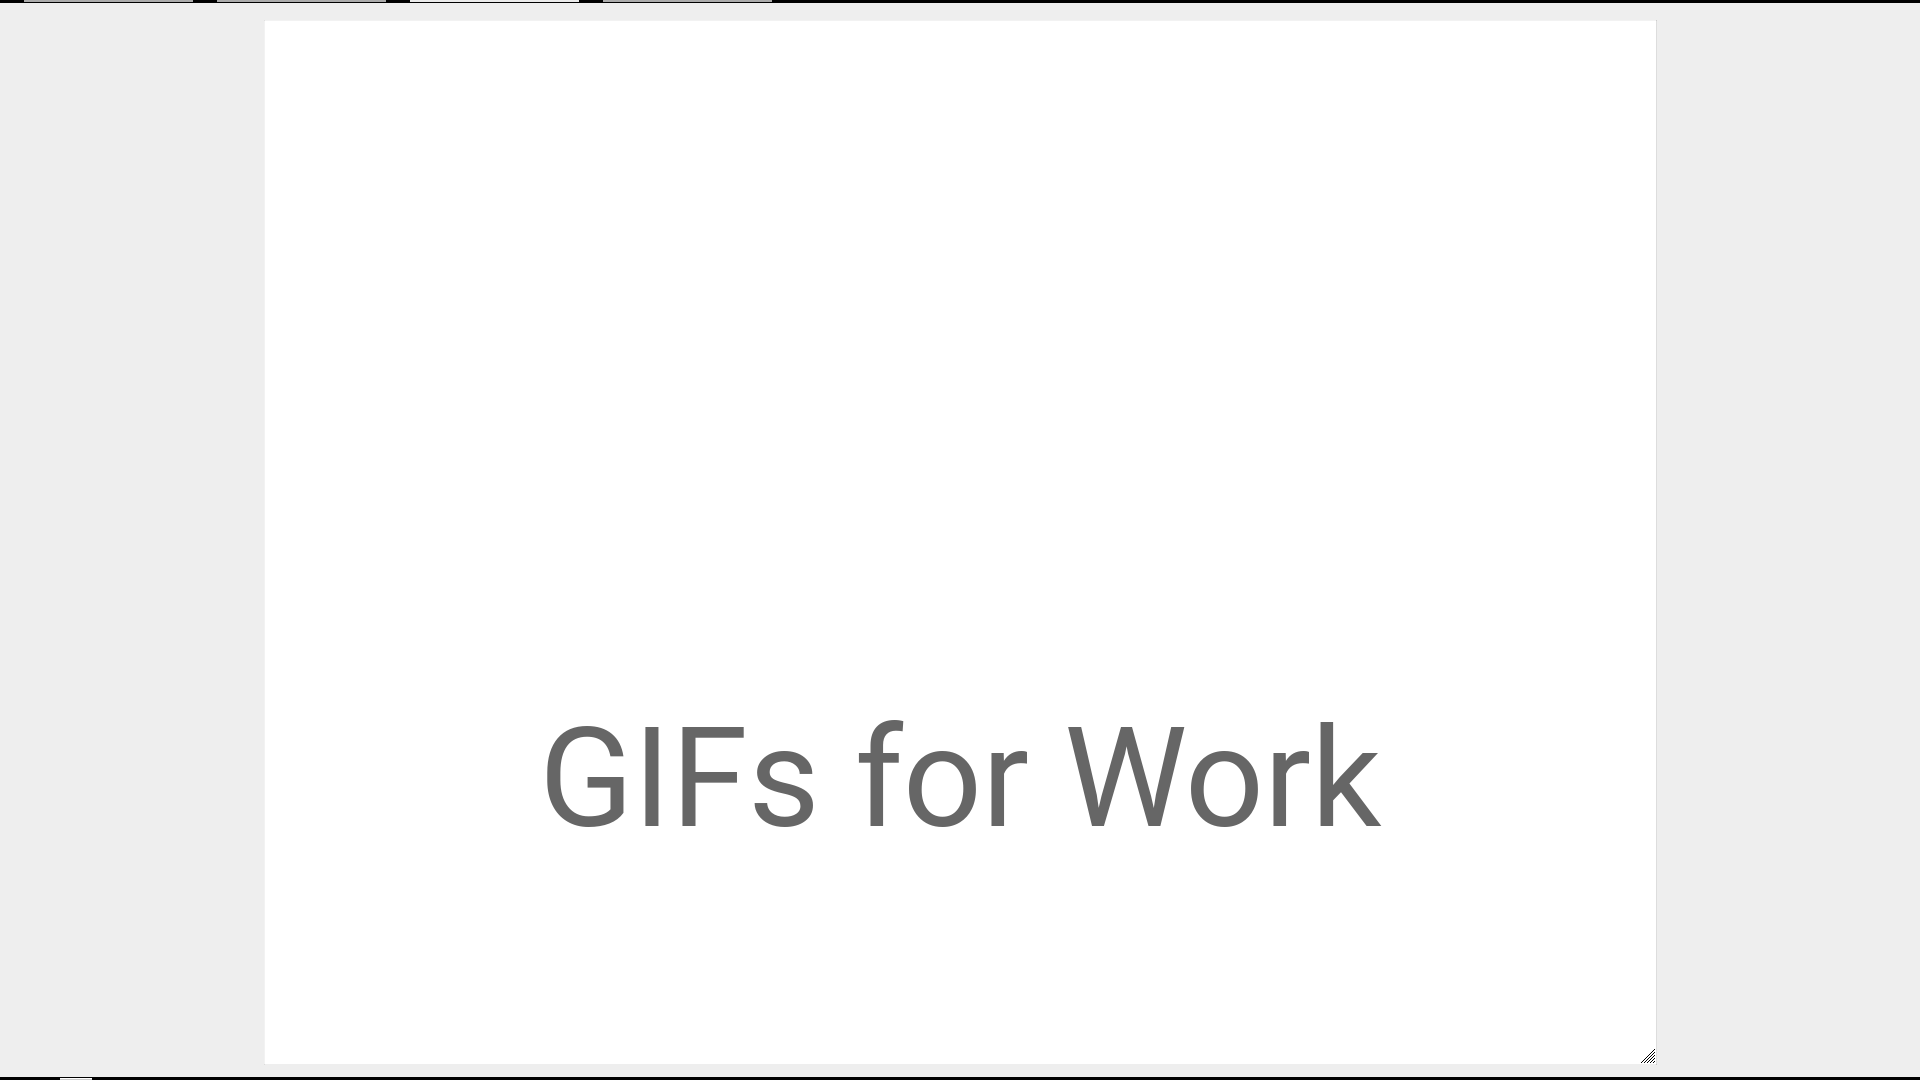 How to create animated GIFs for presentations at work | TechRepublic